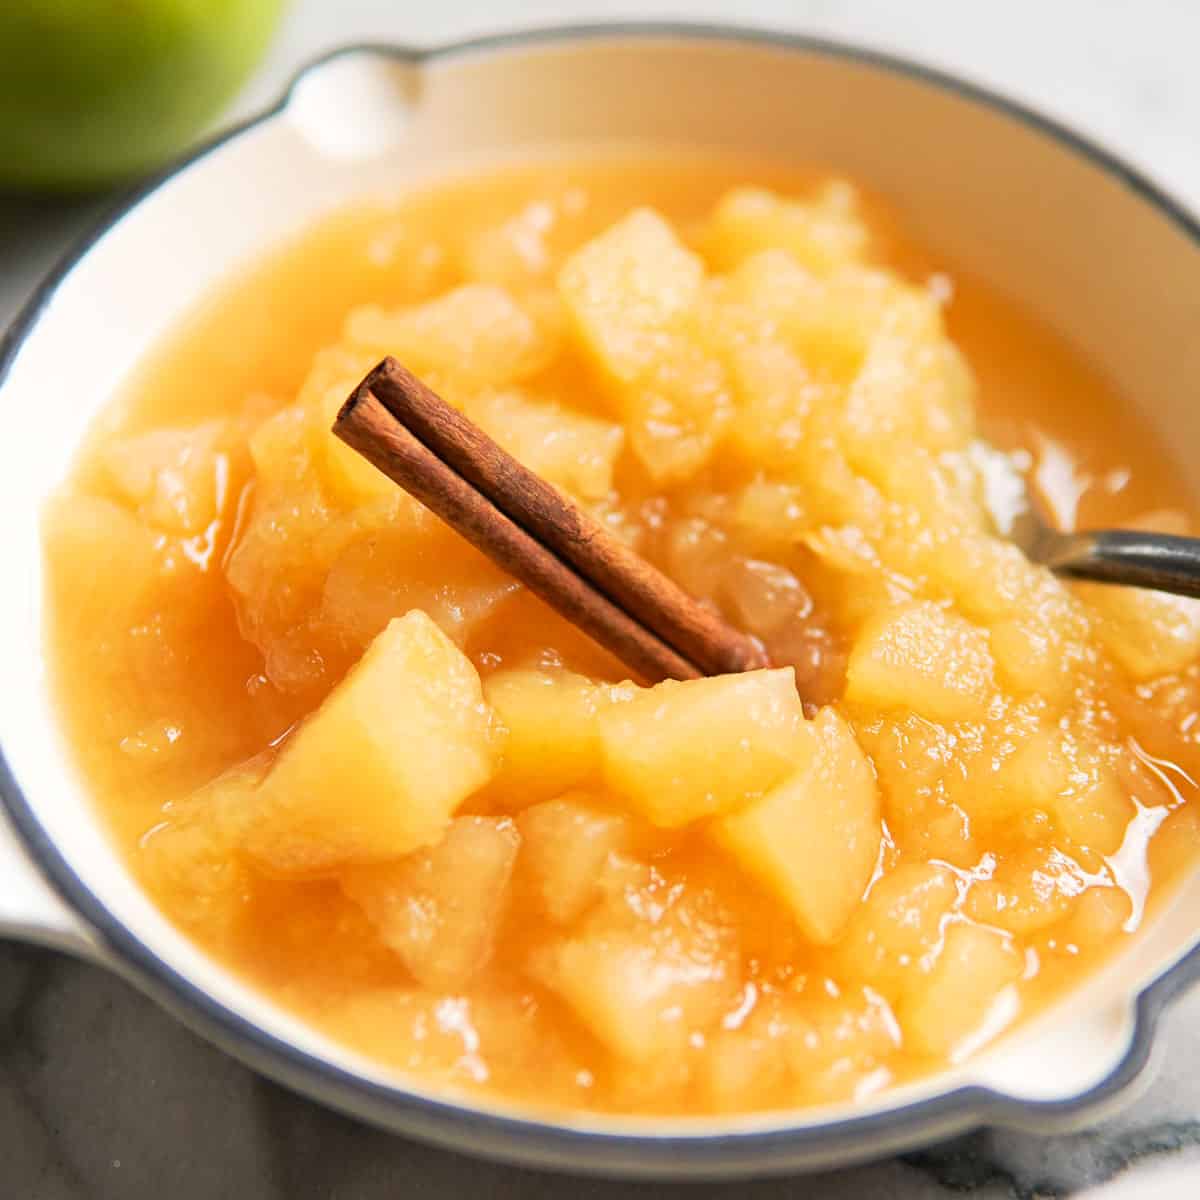 chunky apple sauce in a white dish with a cinnamon stick